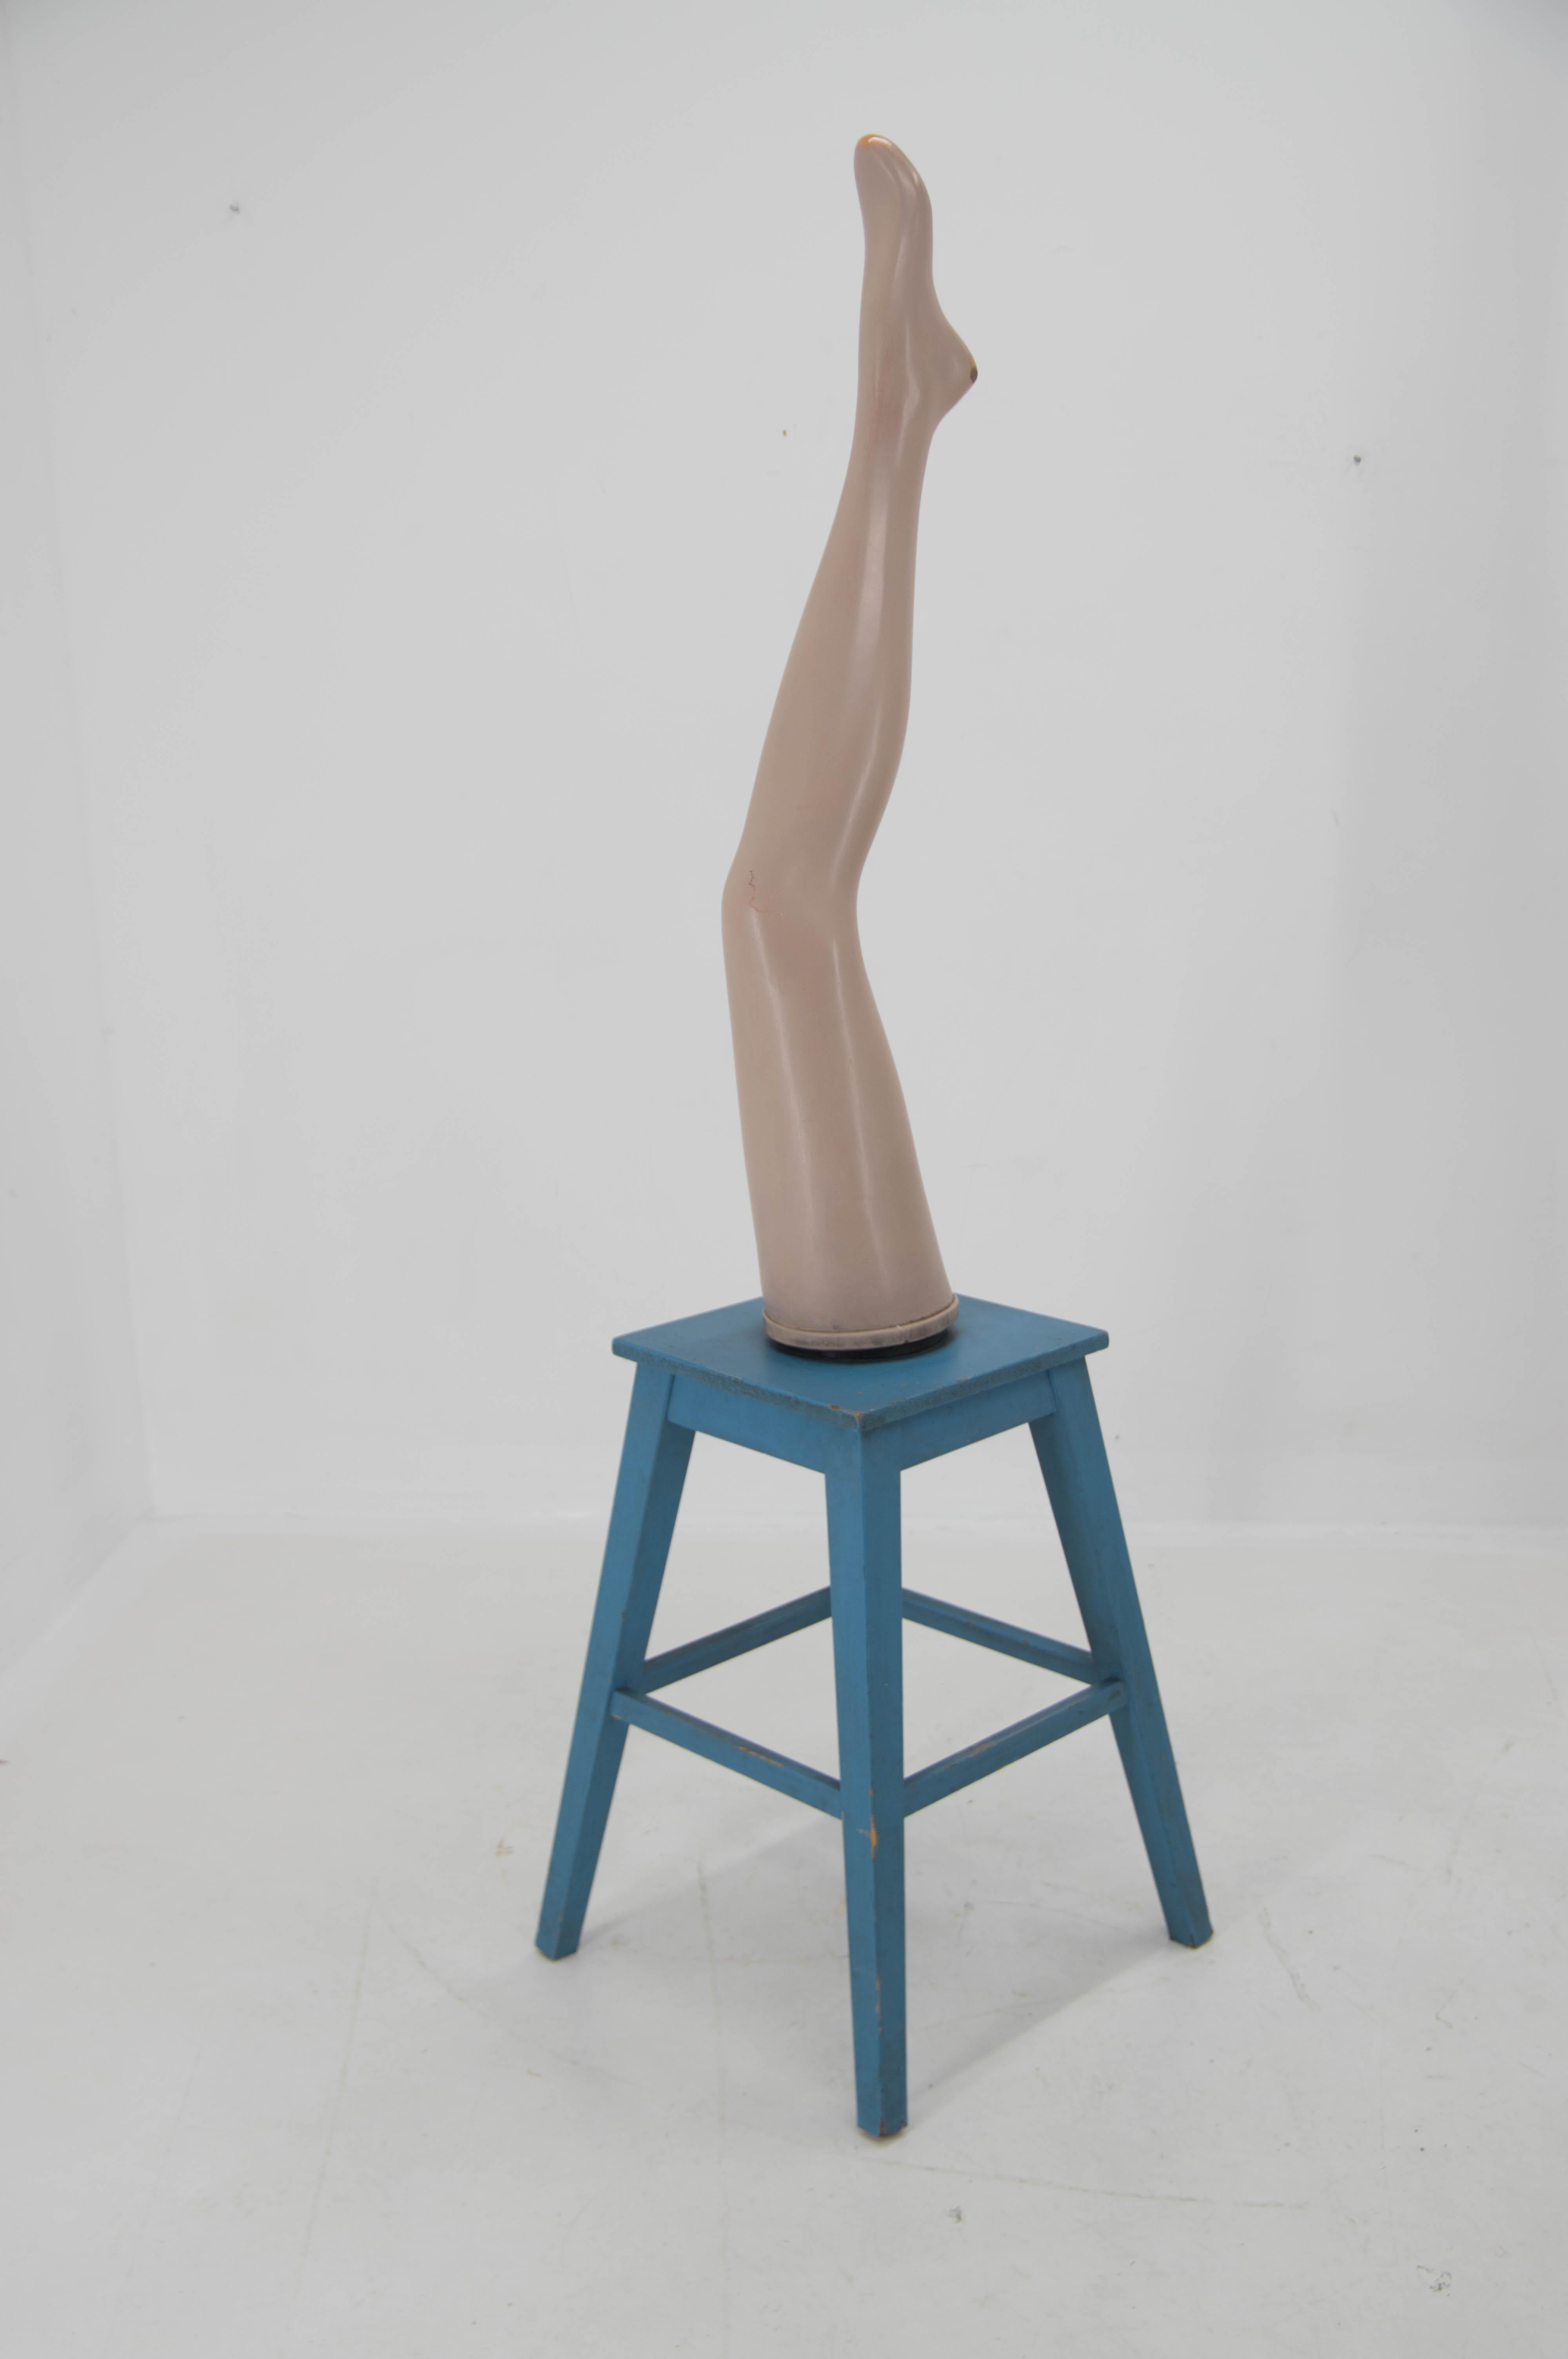 Swivel ladies leg on the stool used as a model for showing tights in textile factory in Czechoslovakia.
Another version with white leg also available.
Nice decorative object.
Shipping quote for US on request.